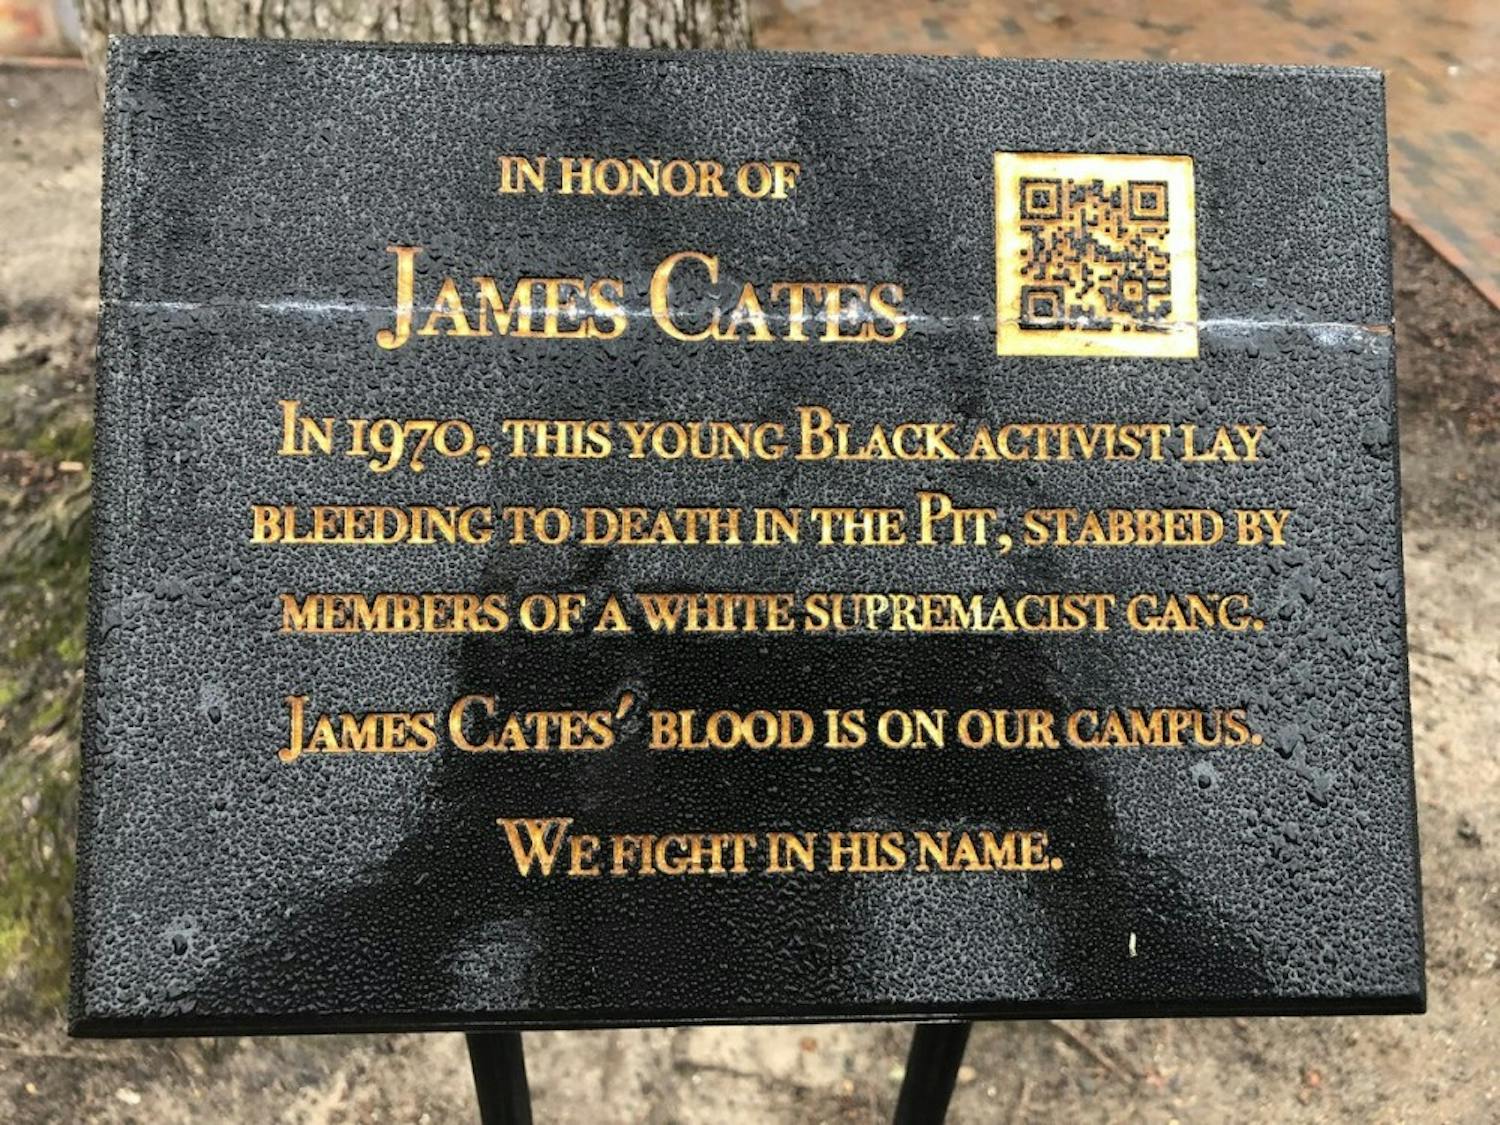 The dedication plaque for James Cates, the UNC student who was stabbed to death by a white supremacist group in the Pit in 1970. 